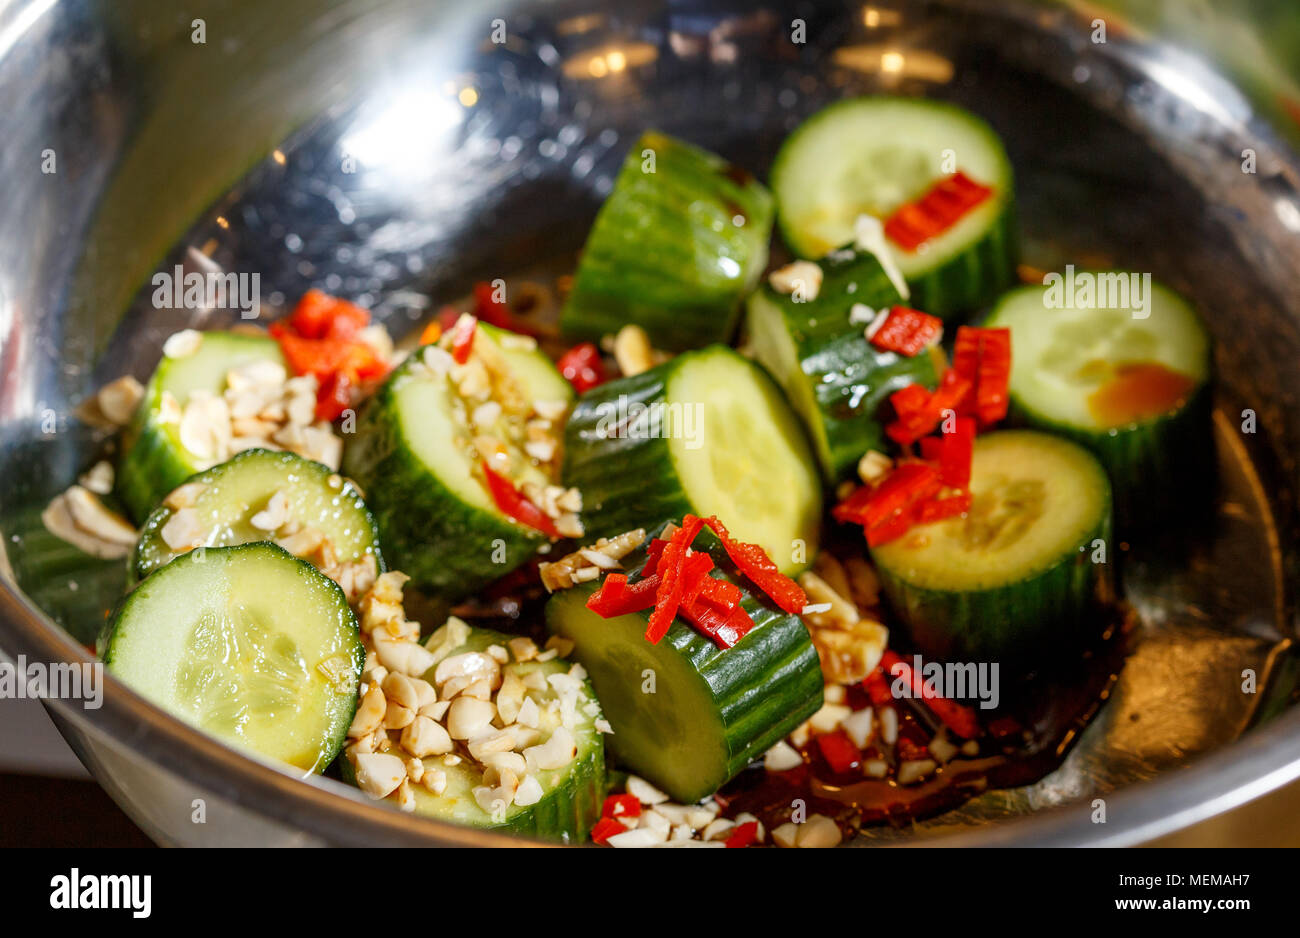 Chinese salad of beaten cucumbers with garlic, chili pepper, soy sauce and sesame oil Stock Photo